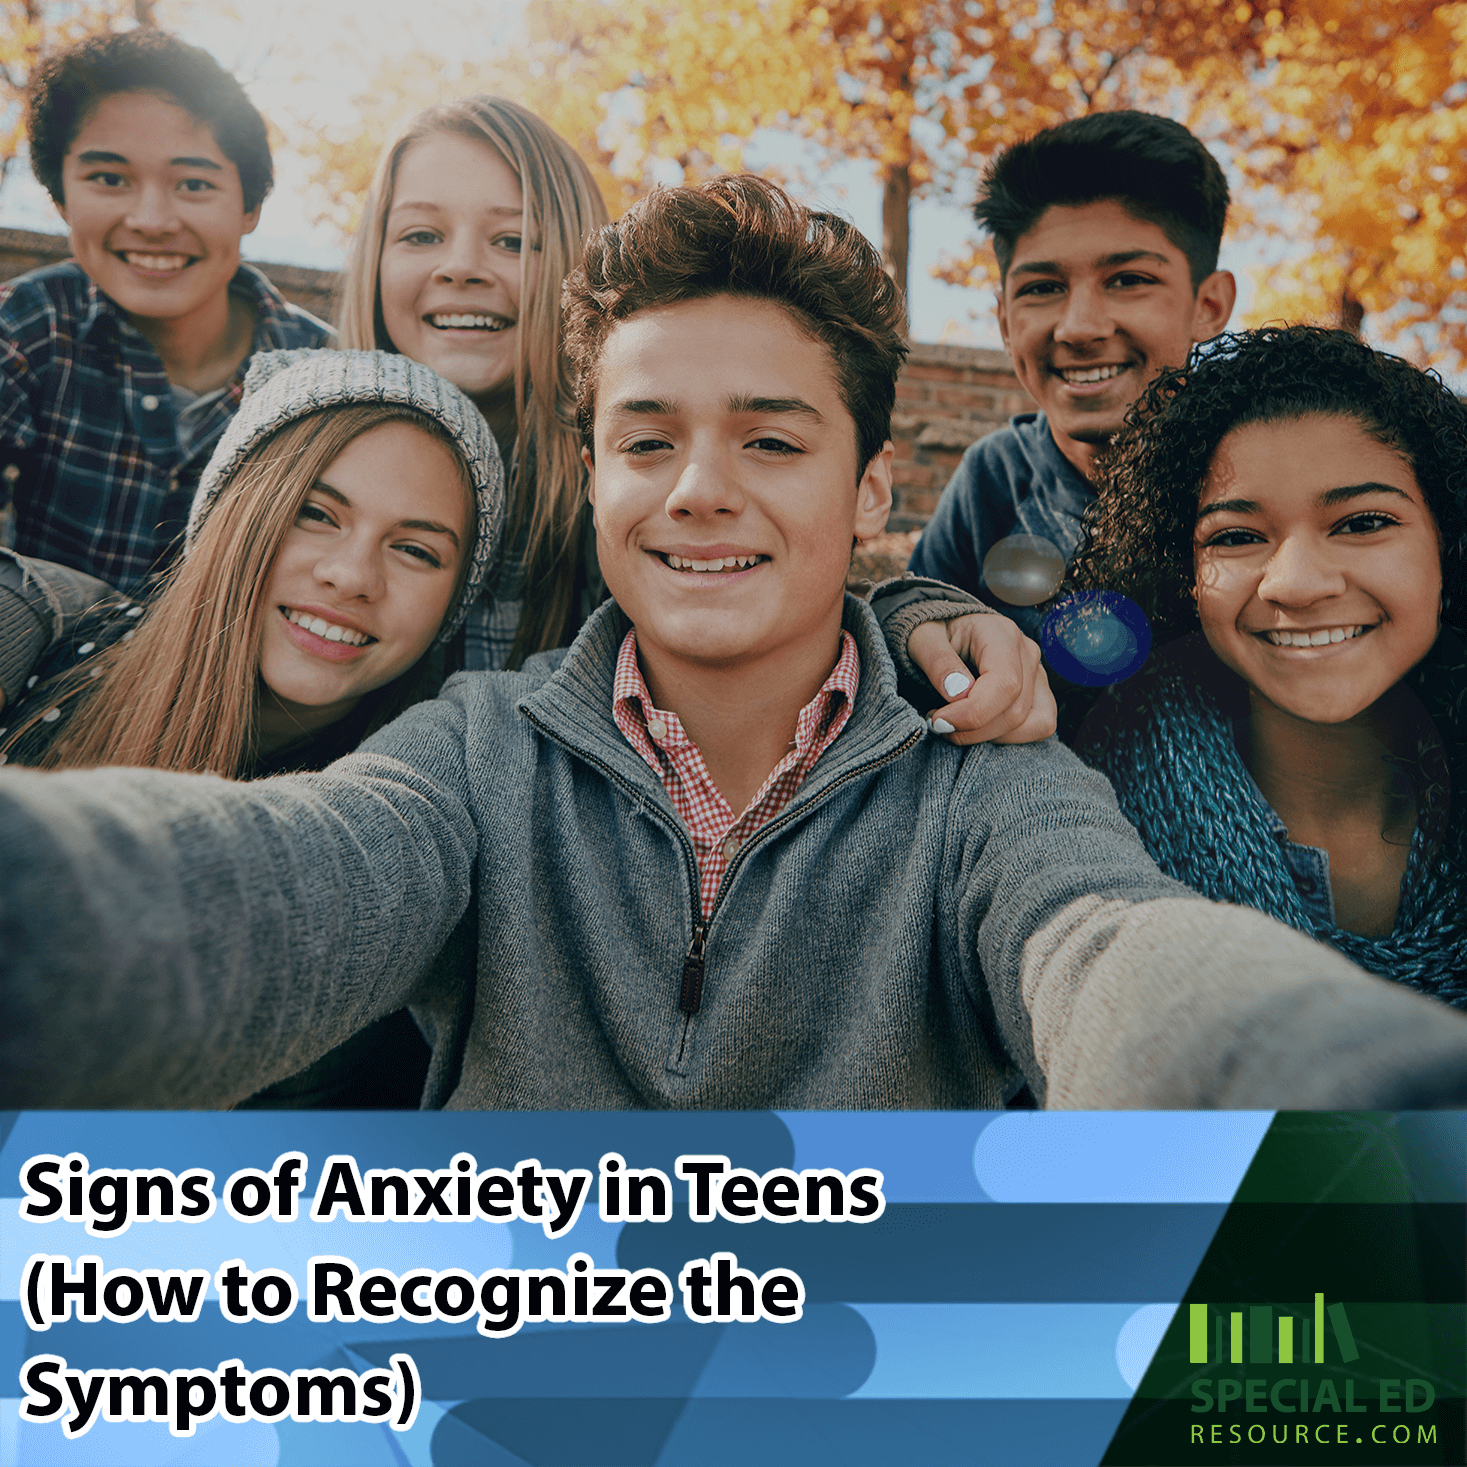 Smiling teenagers standing together appearing happy but is typical of hiding signs of anxiety in teens.